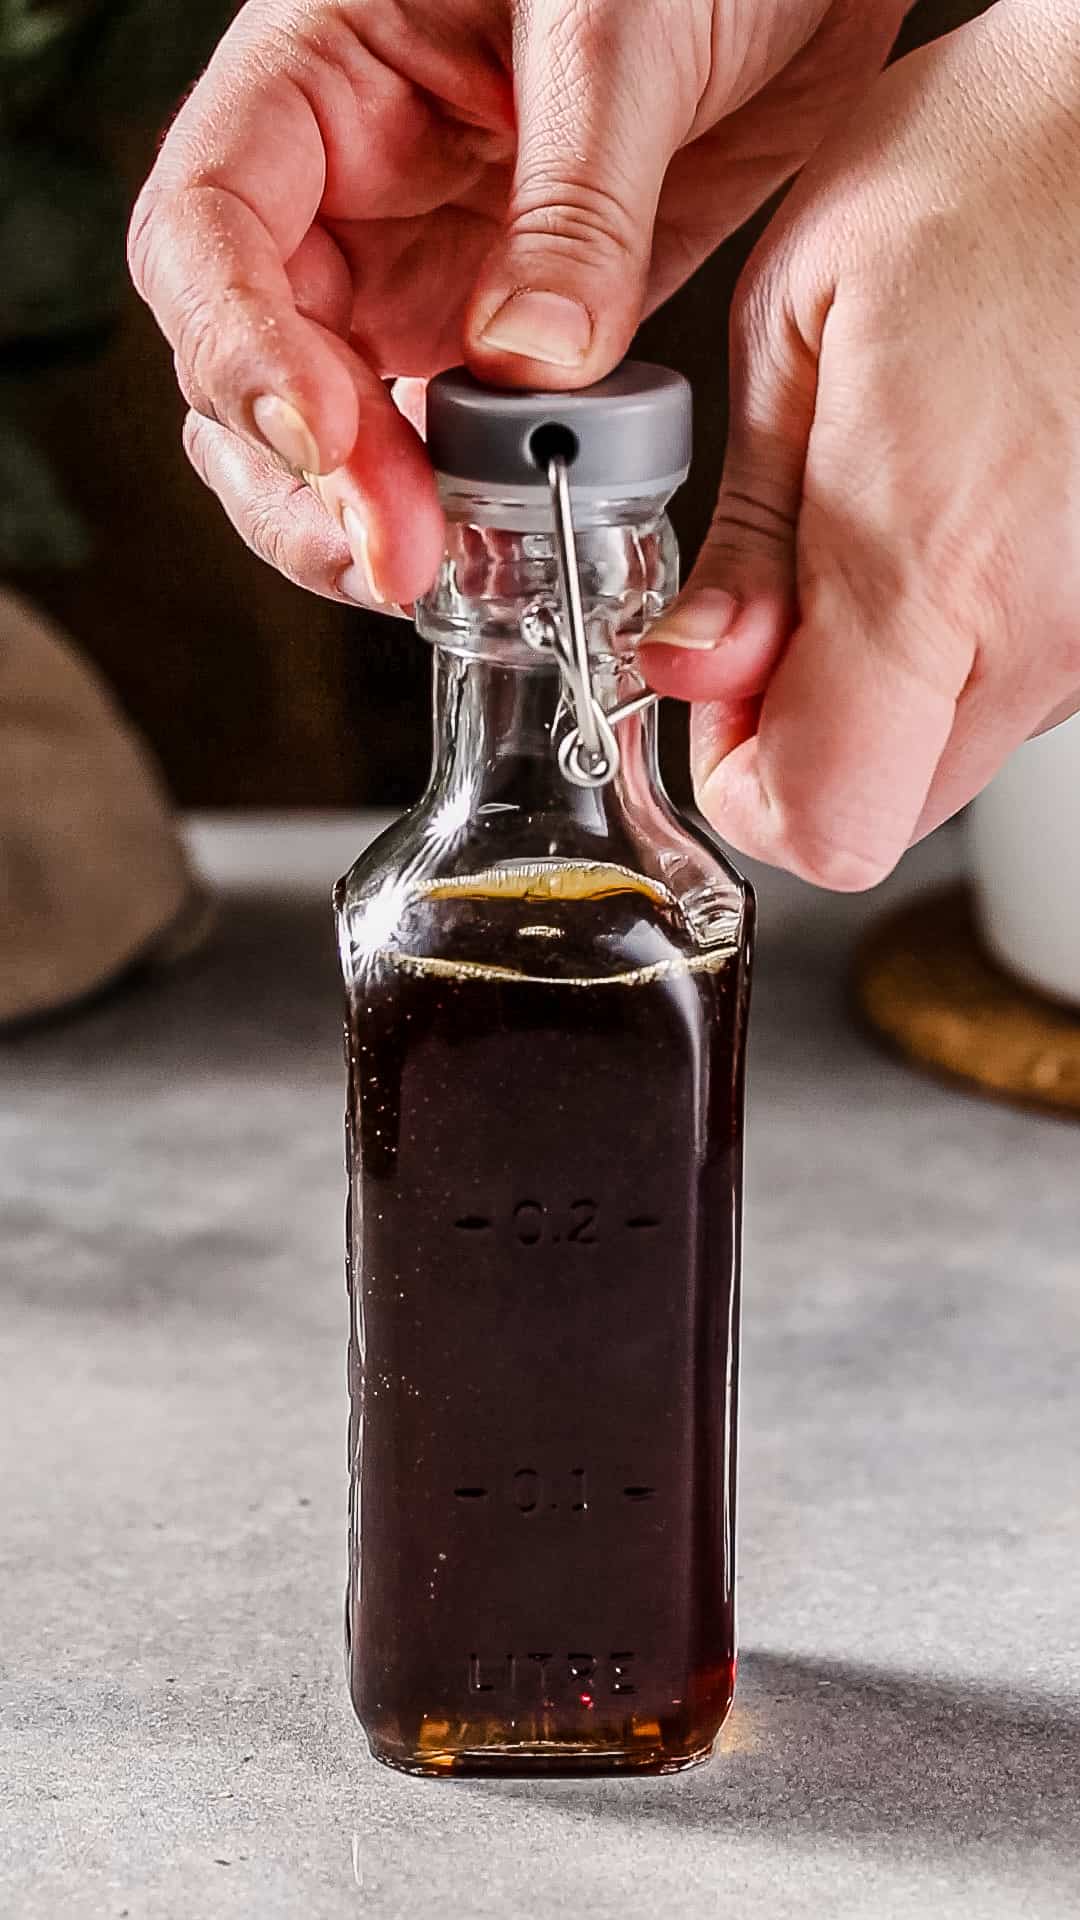 Hands closing up a glass swing-top bottle filled with brown liquid.